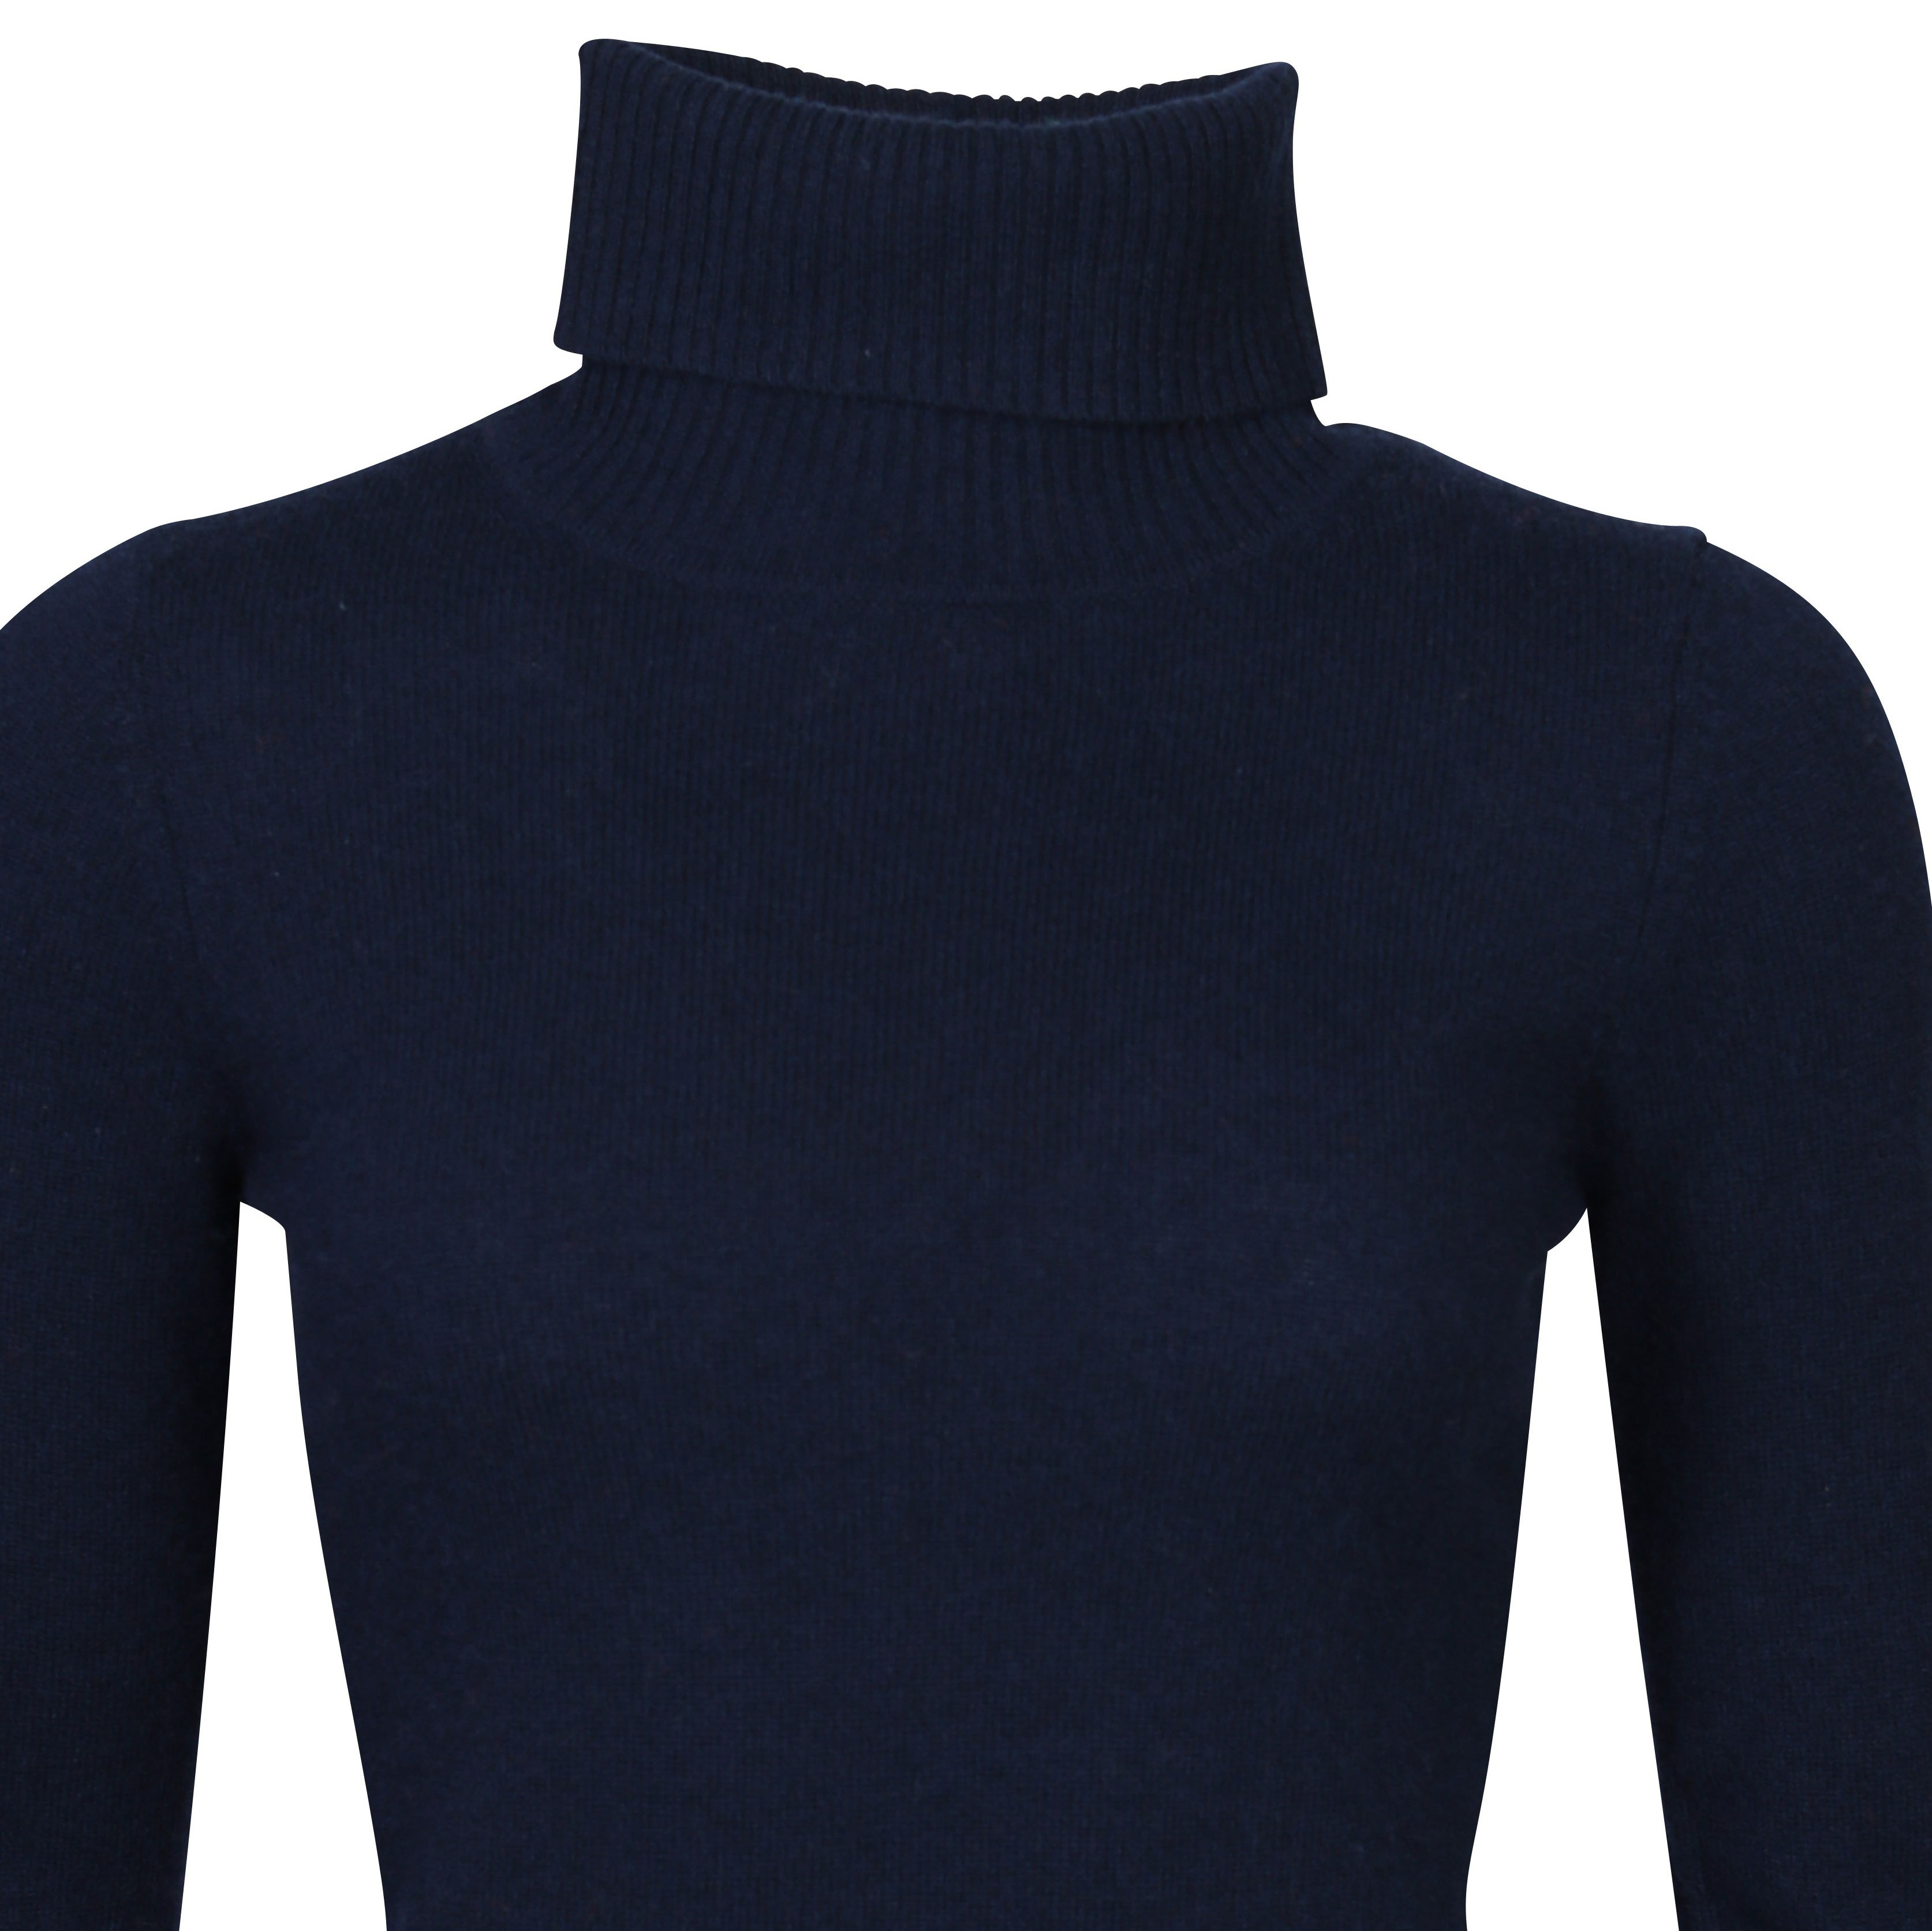 Absolut Cashmere Nina Turtle Neck in Nuit S